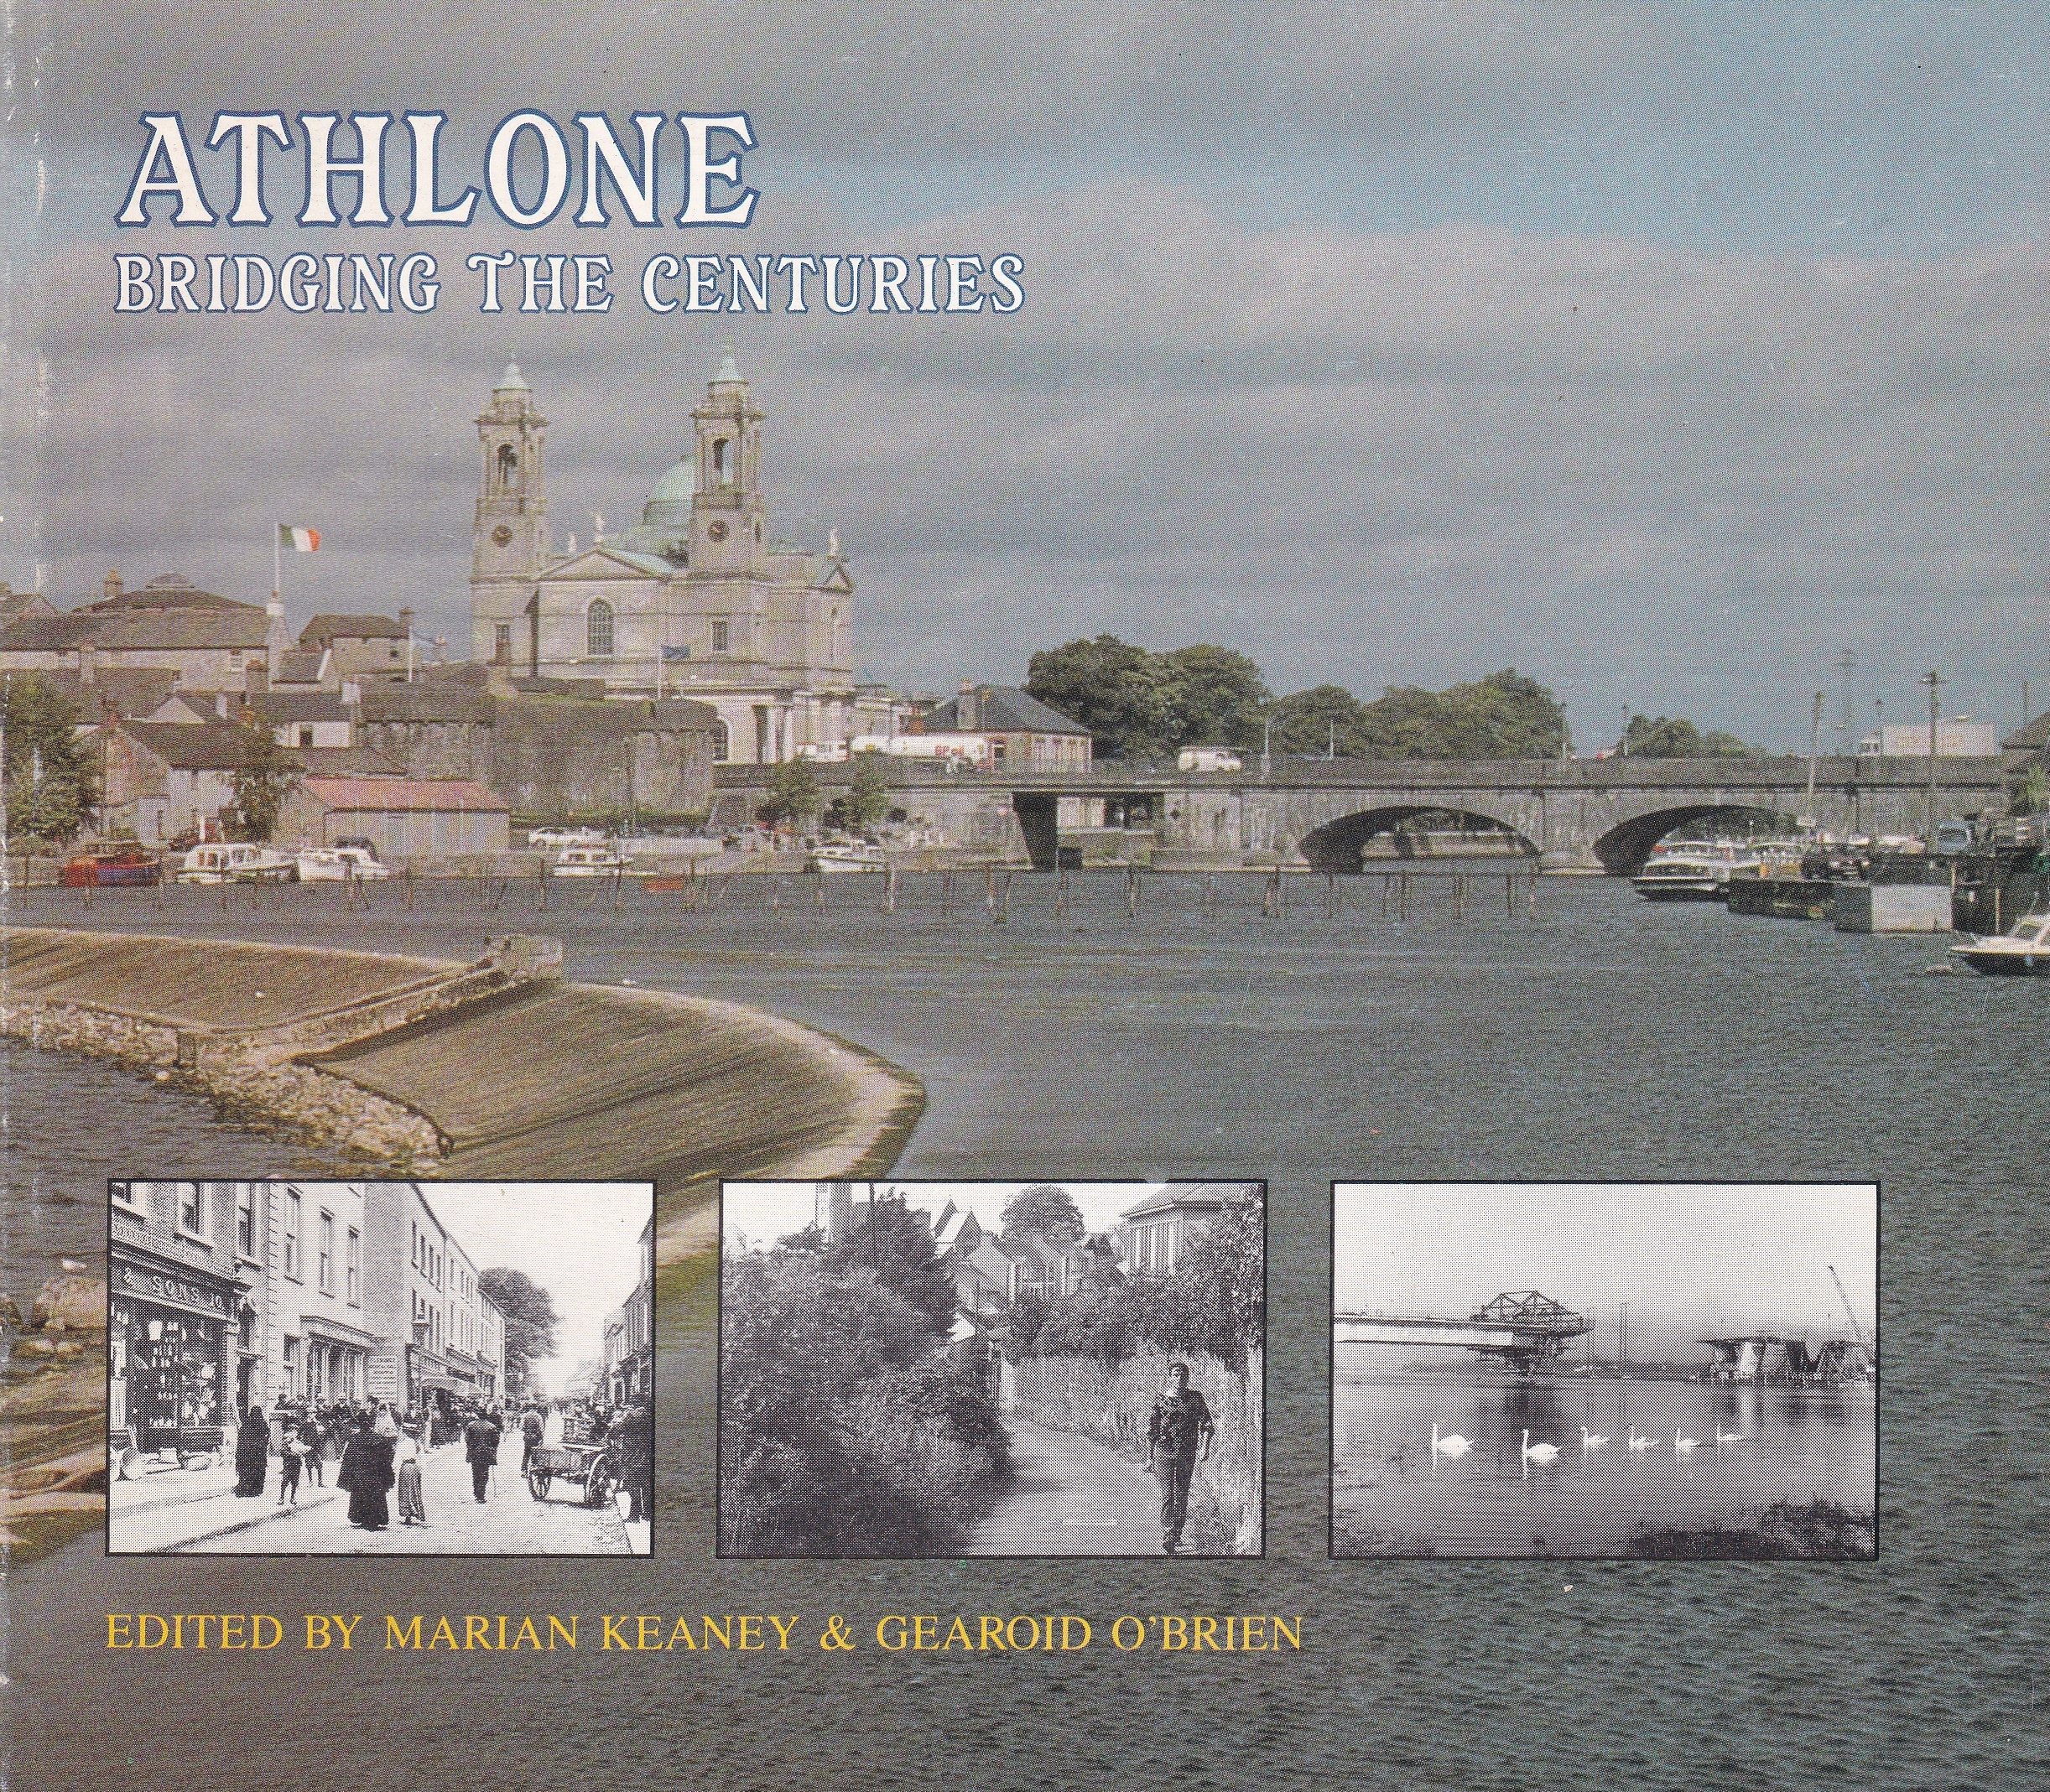 Athlone: Bridging the Centuries | Marian Keaney and Gearoid O'Brien (eds.) | Charlie Byrne's